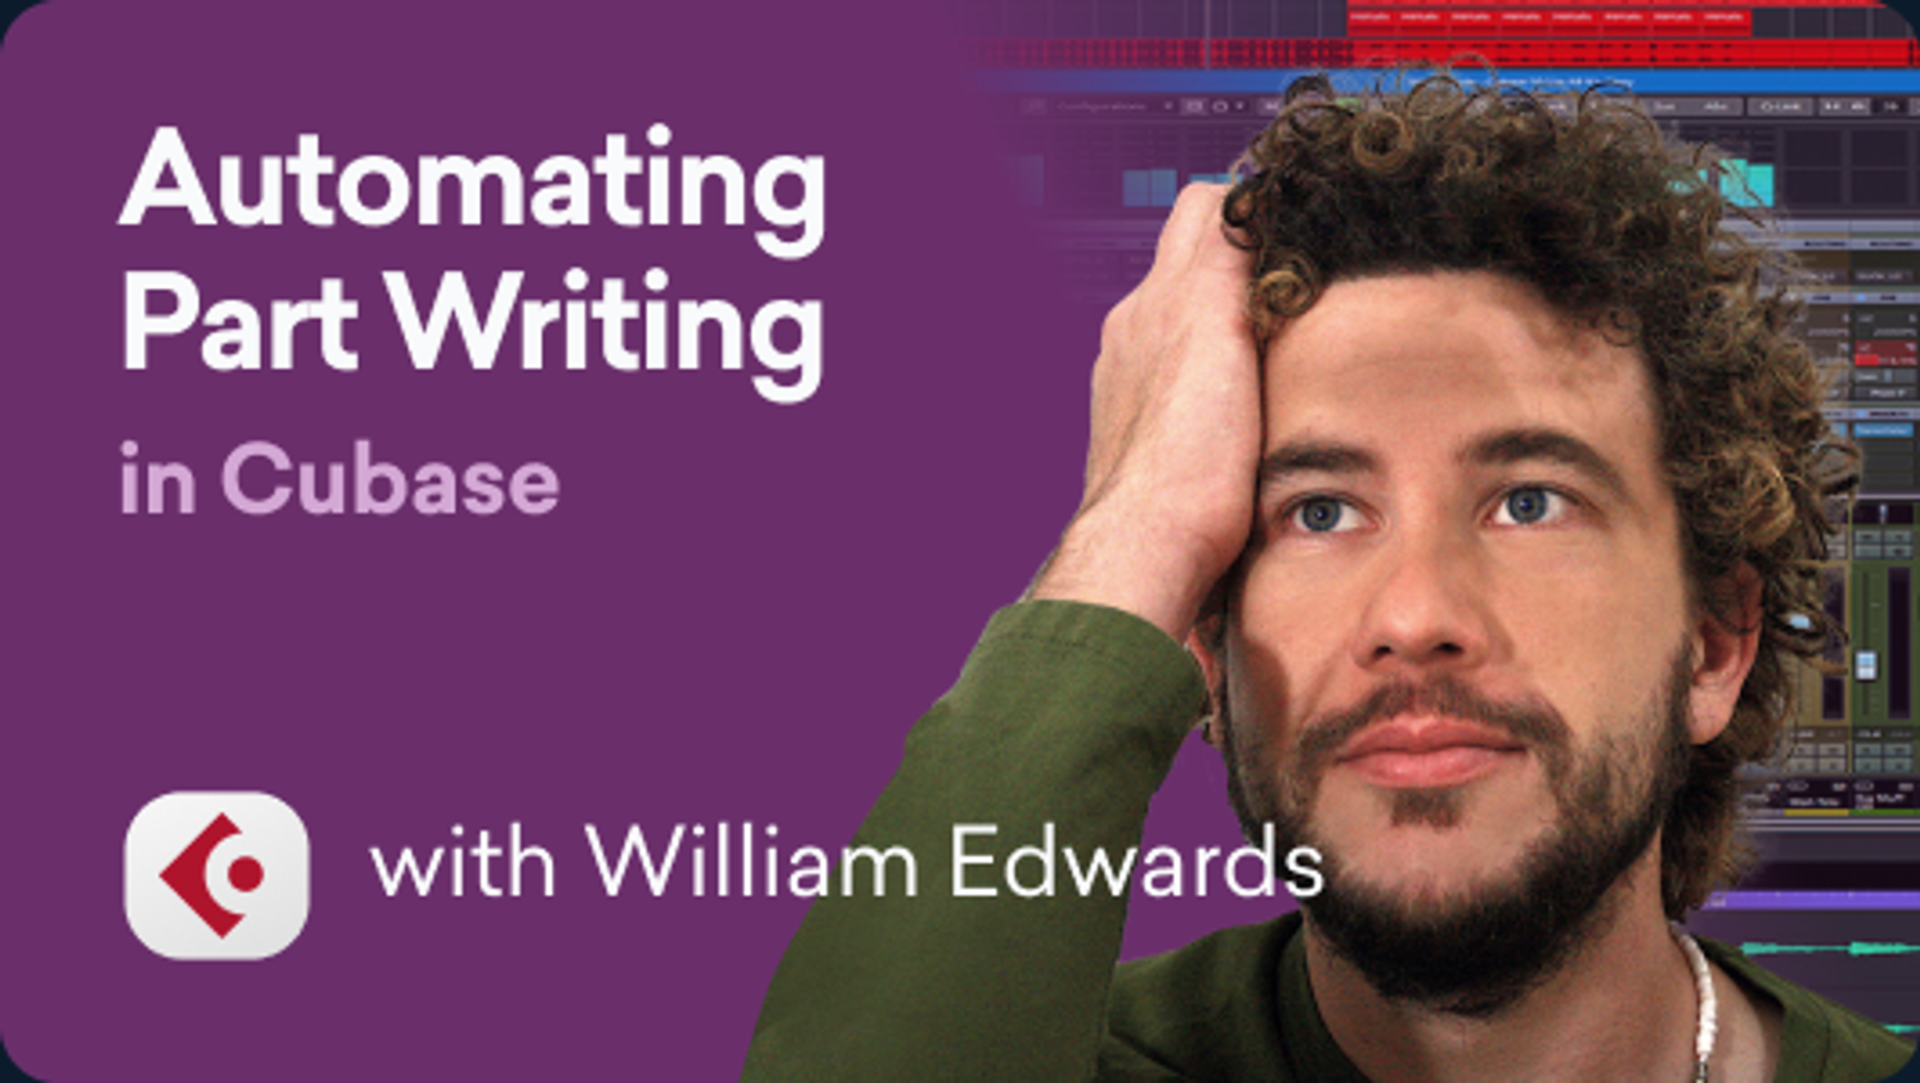 Automating Part Writing in Cubase